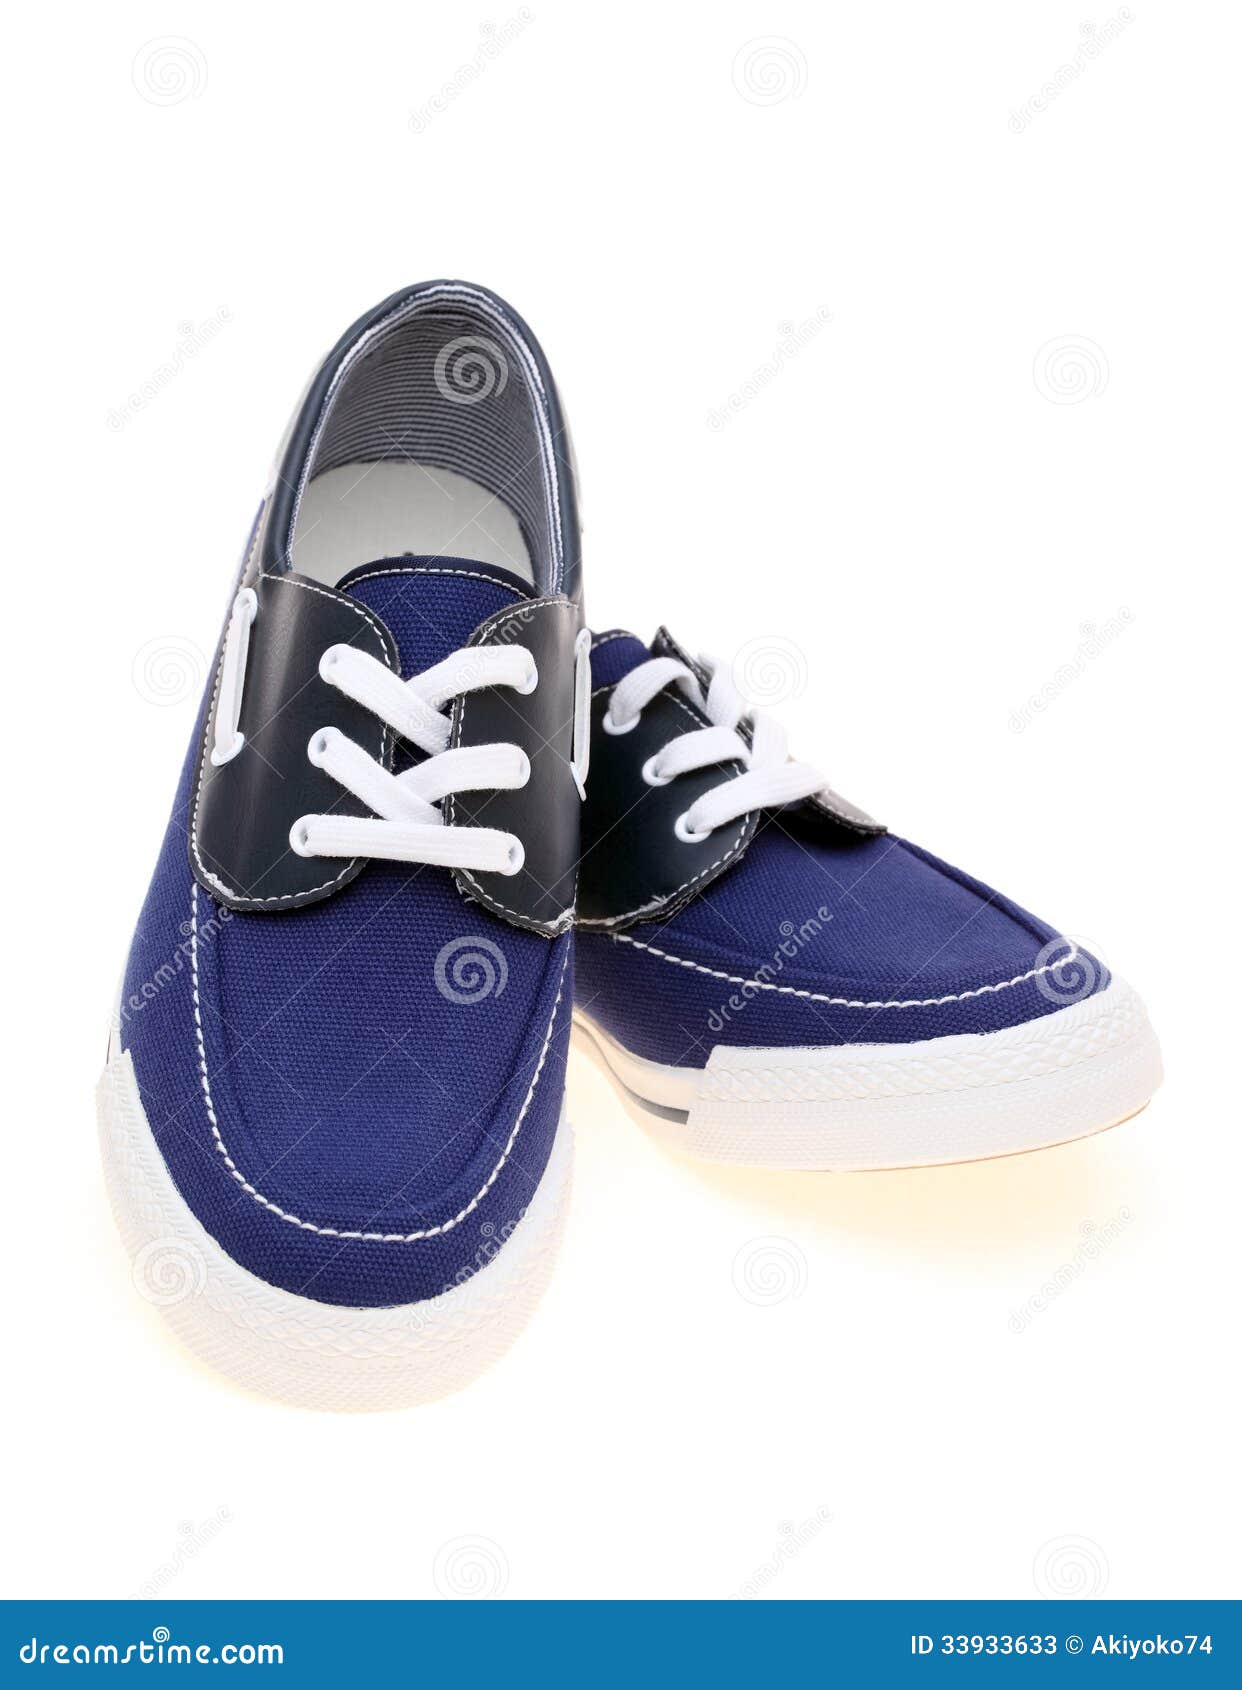 Walking blue sneakers stock image. Image of canvas, life - 33933633